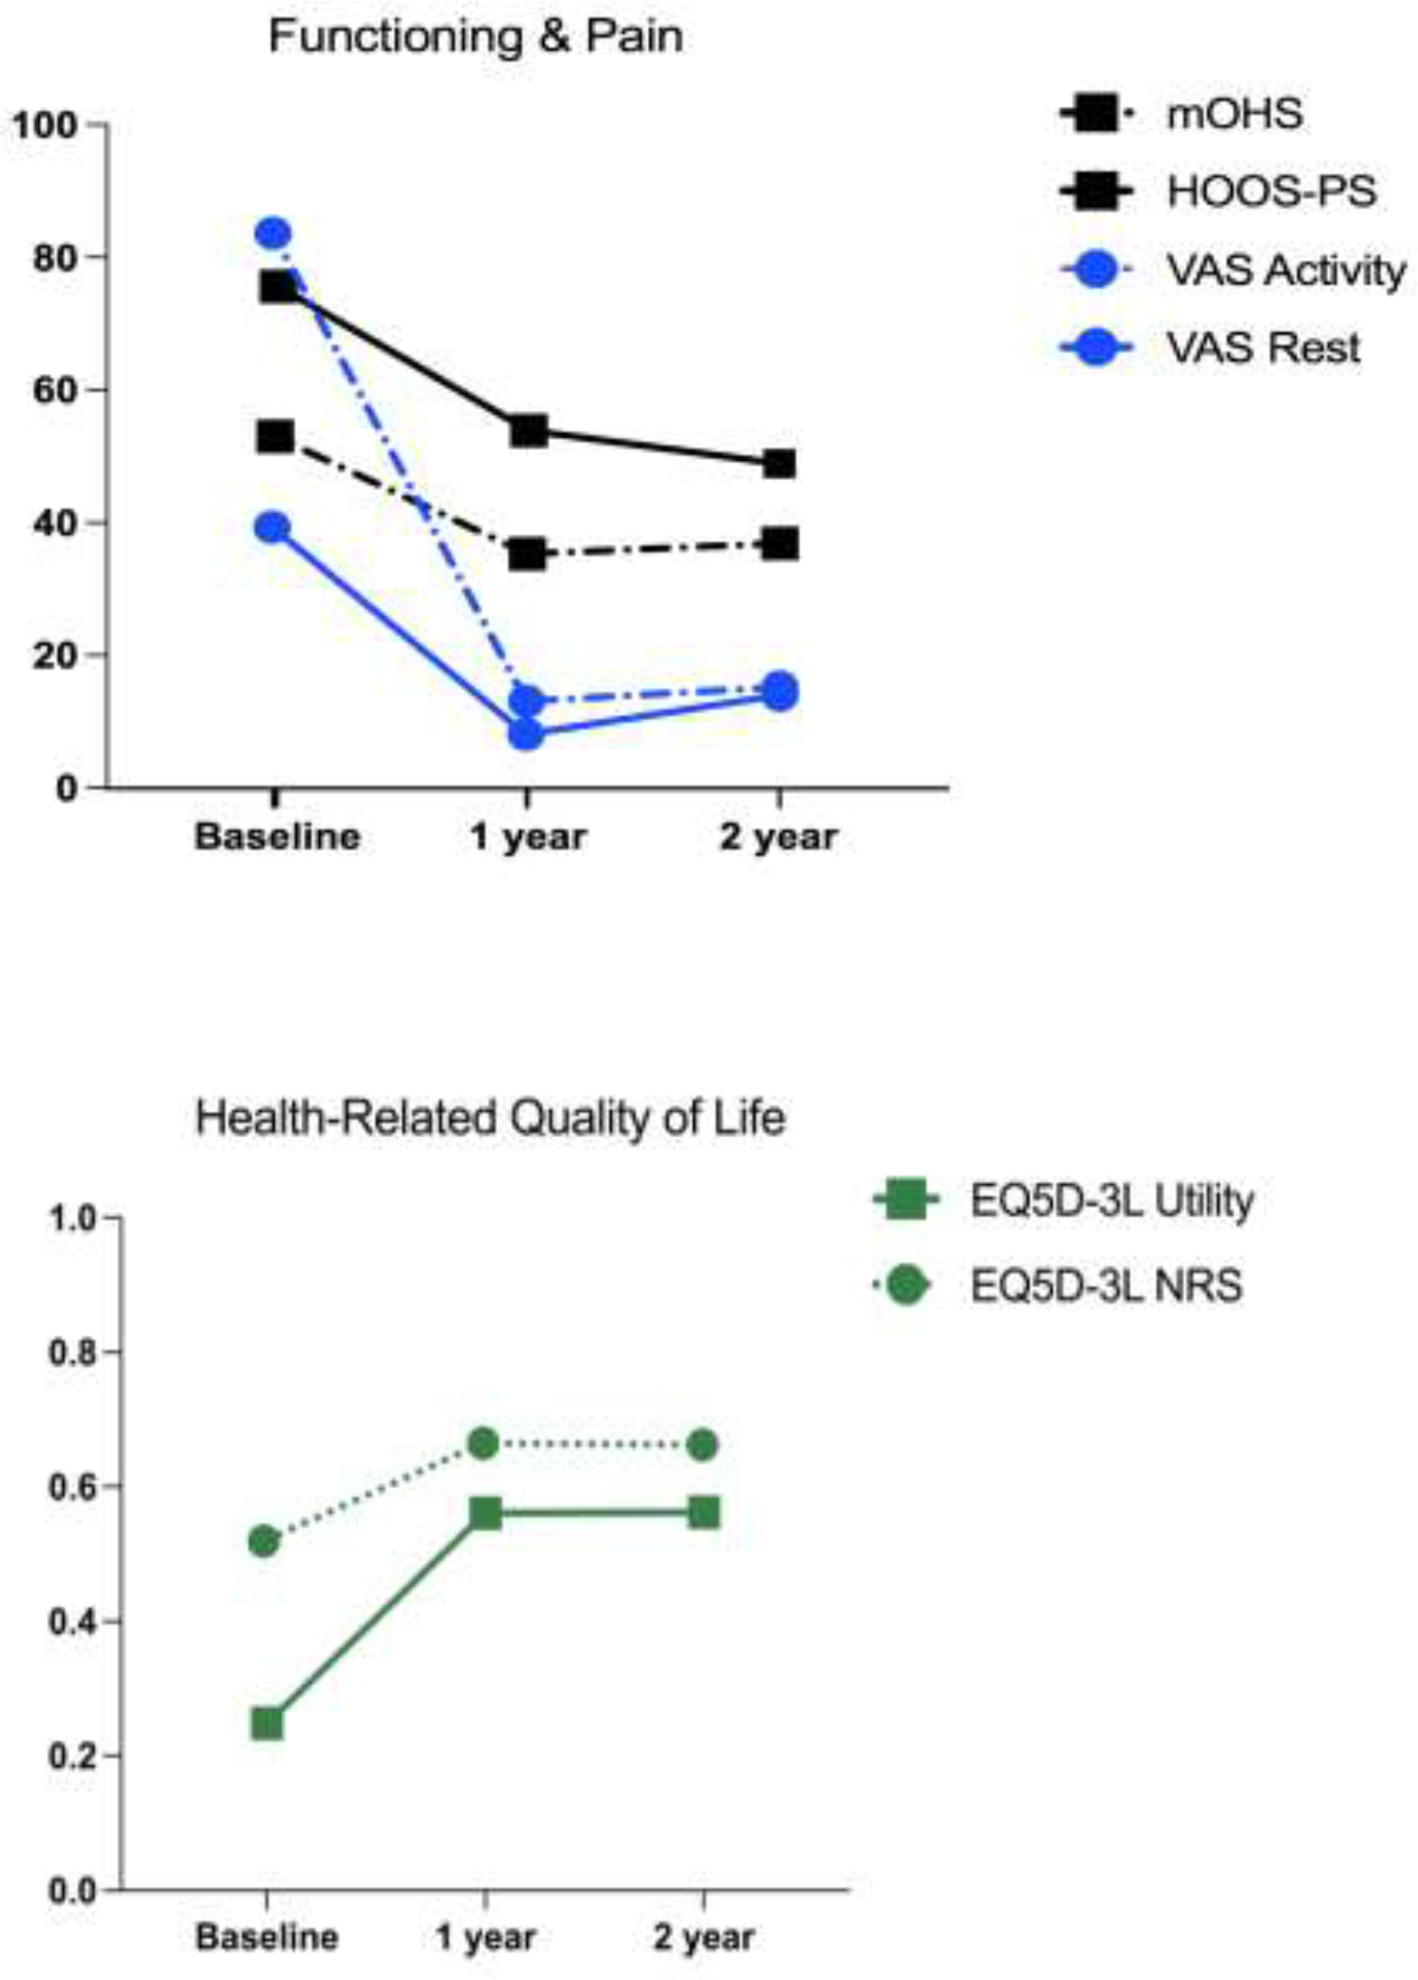 Fig. 4 
            Illustration of patient-reported outcome measures at baseline, and one- and two-year follow-up. Stratification according to functioning, pain, and health-related quality of life.
          